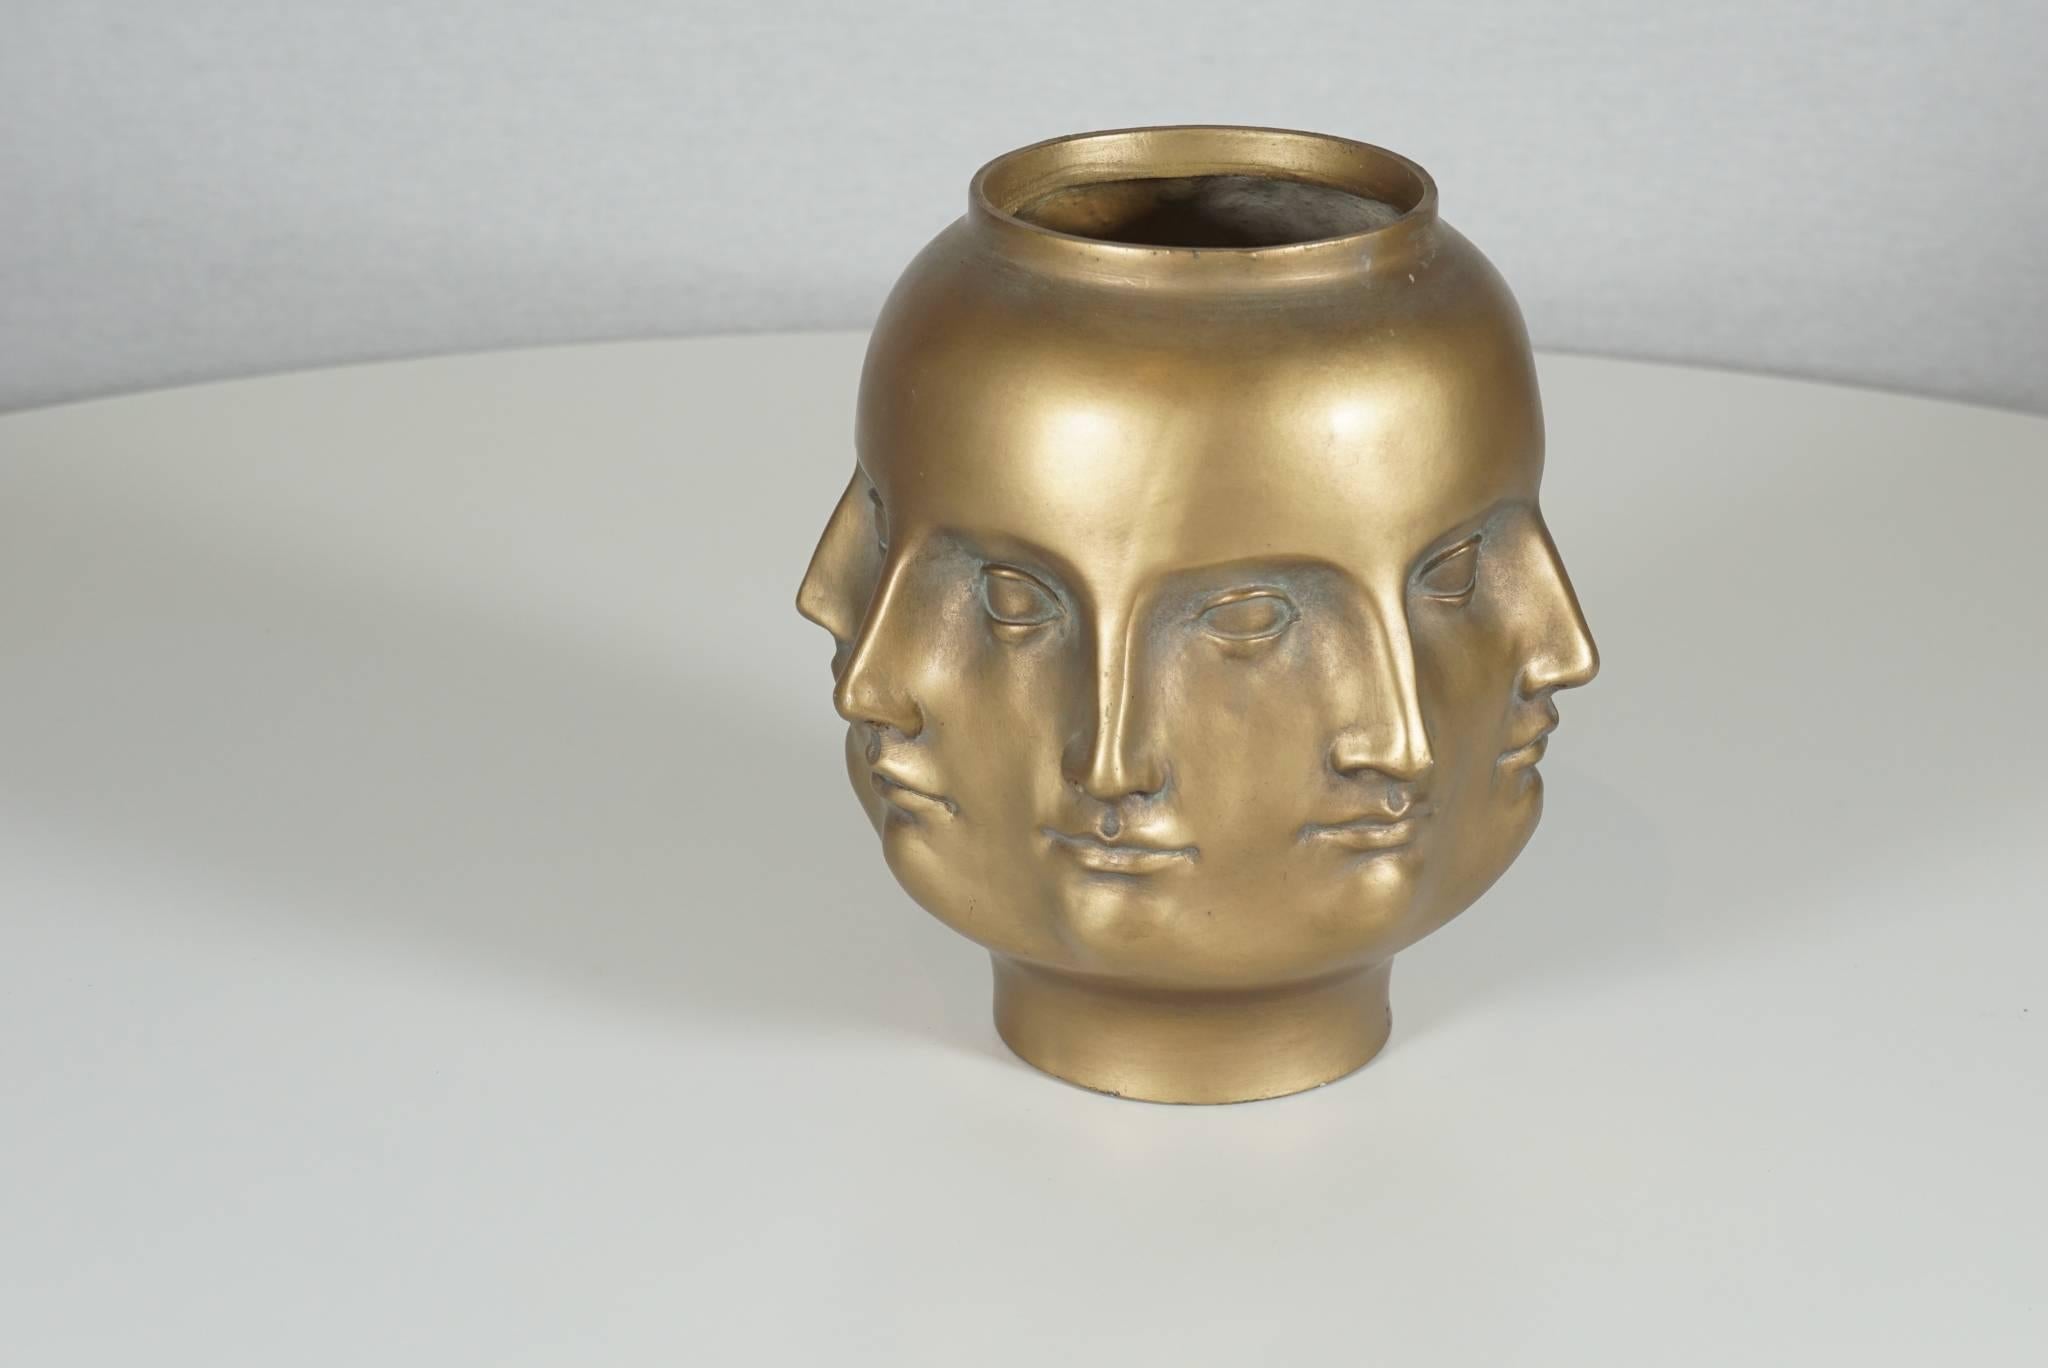 Here is a gold version of the iconic Dora Maar vase in resin.